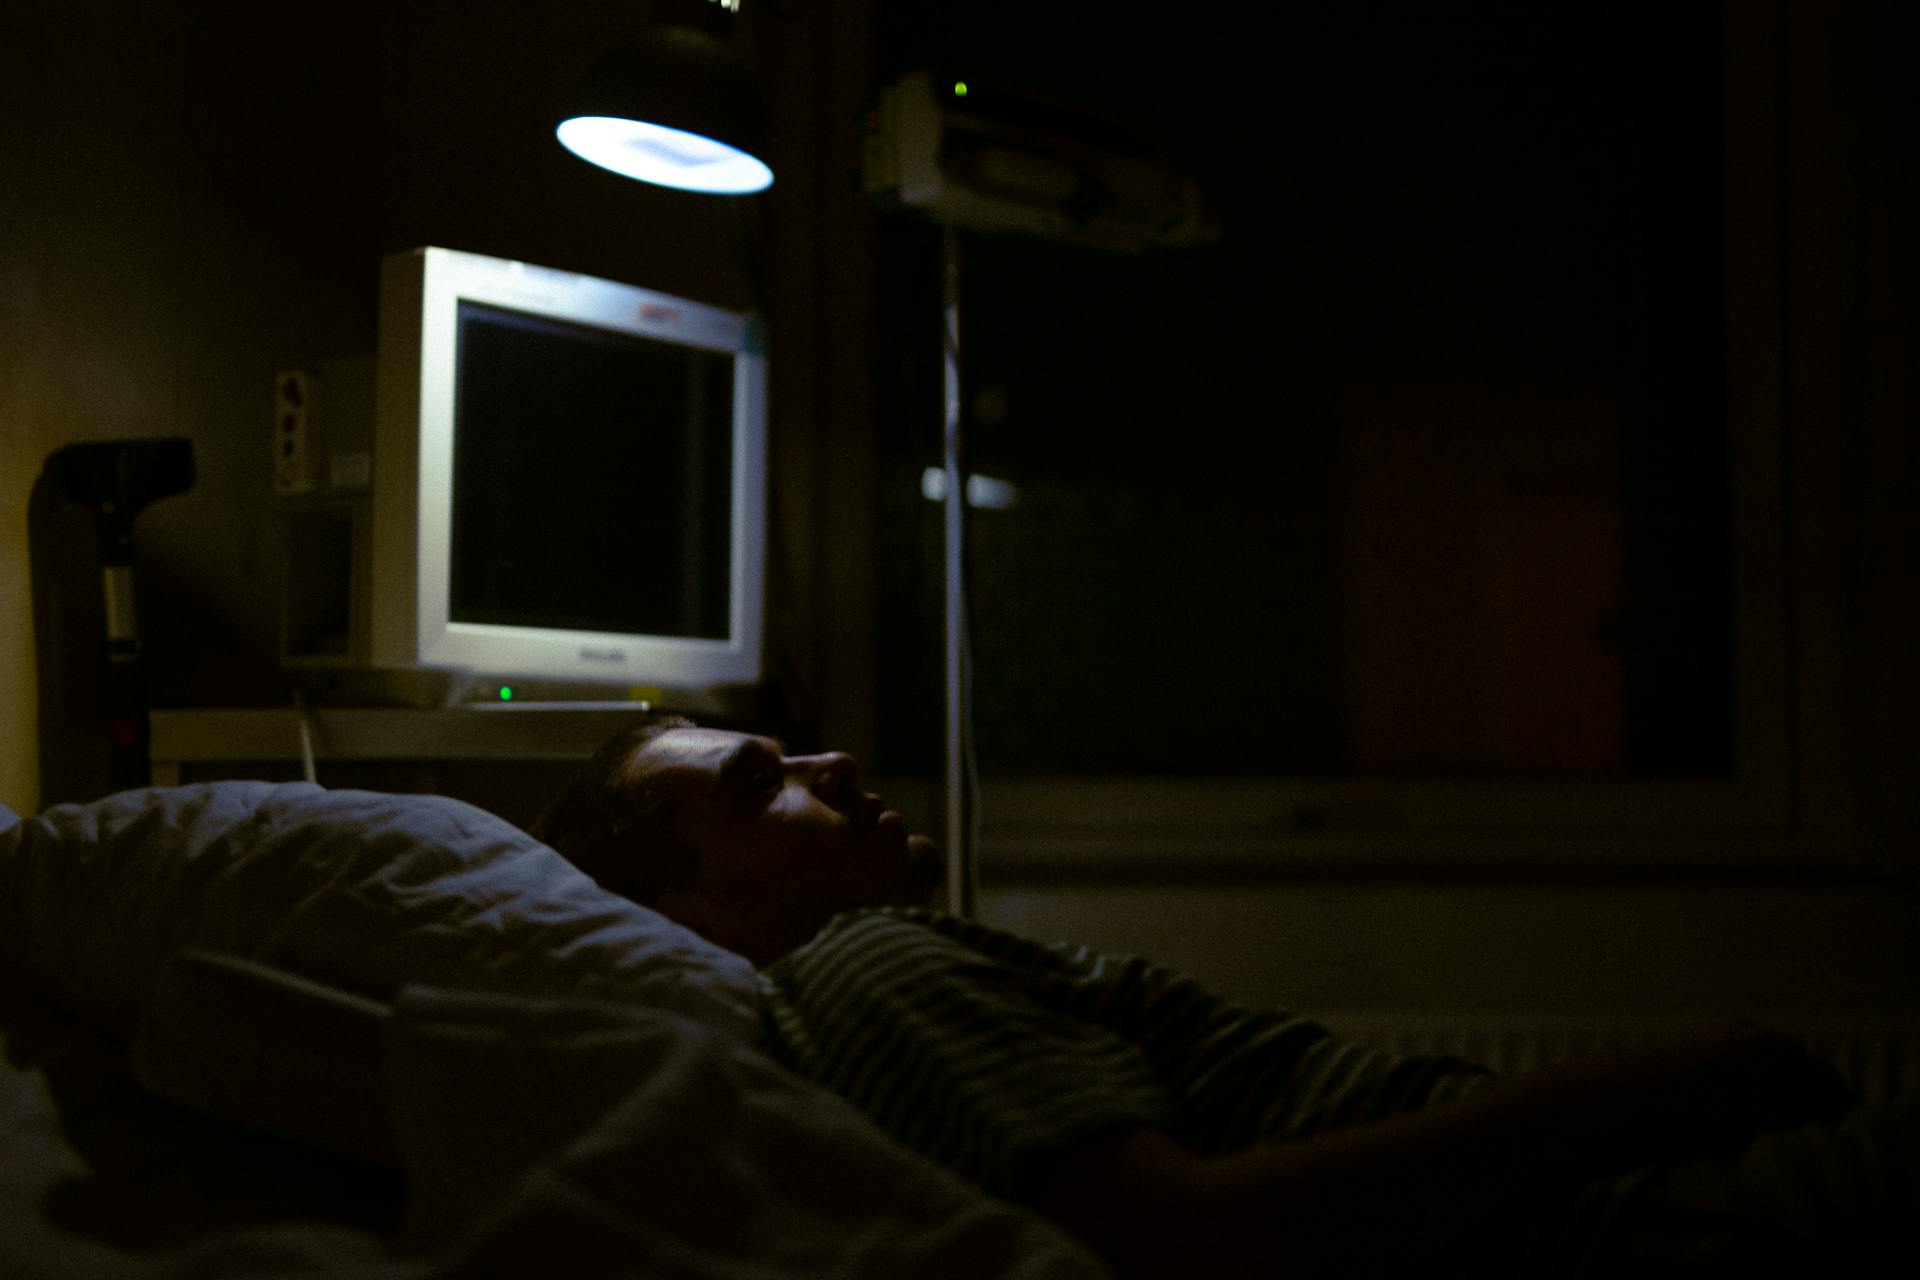 A man lying in a hospital bed | Source: Pexels